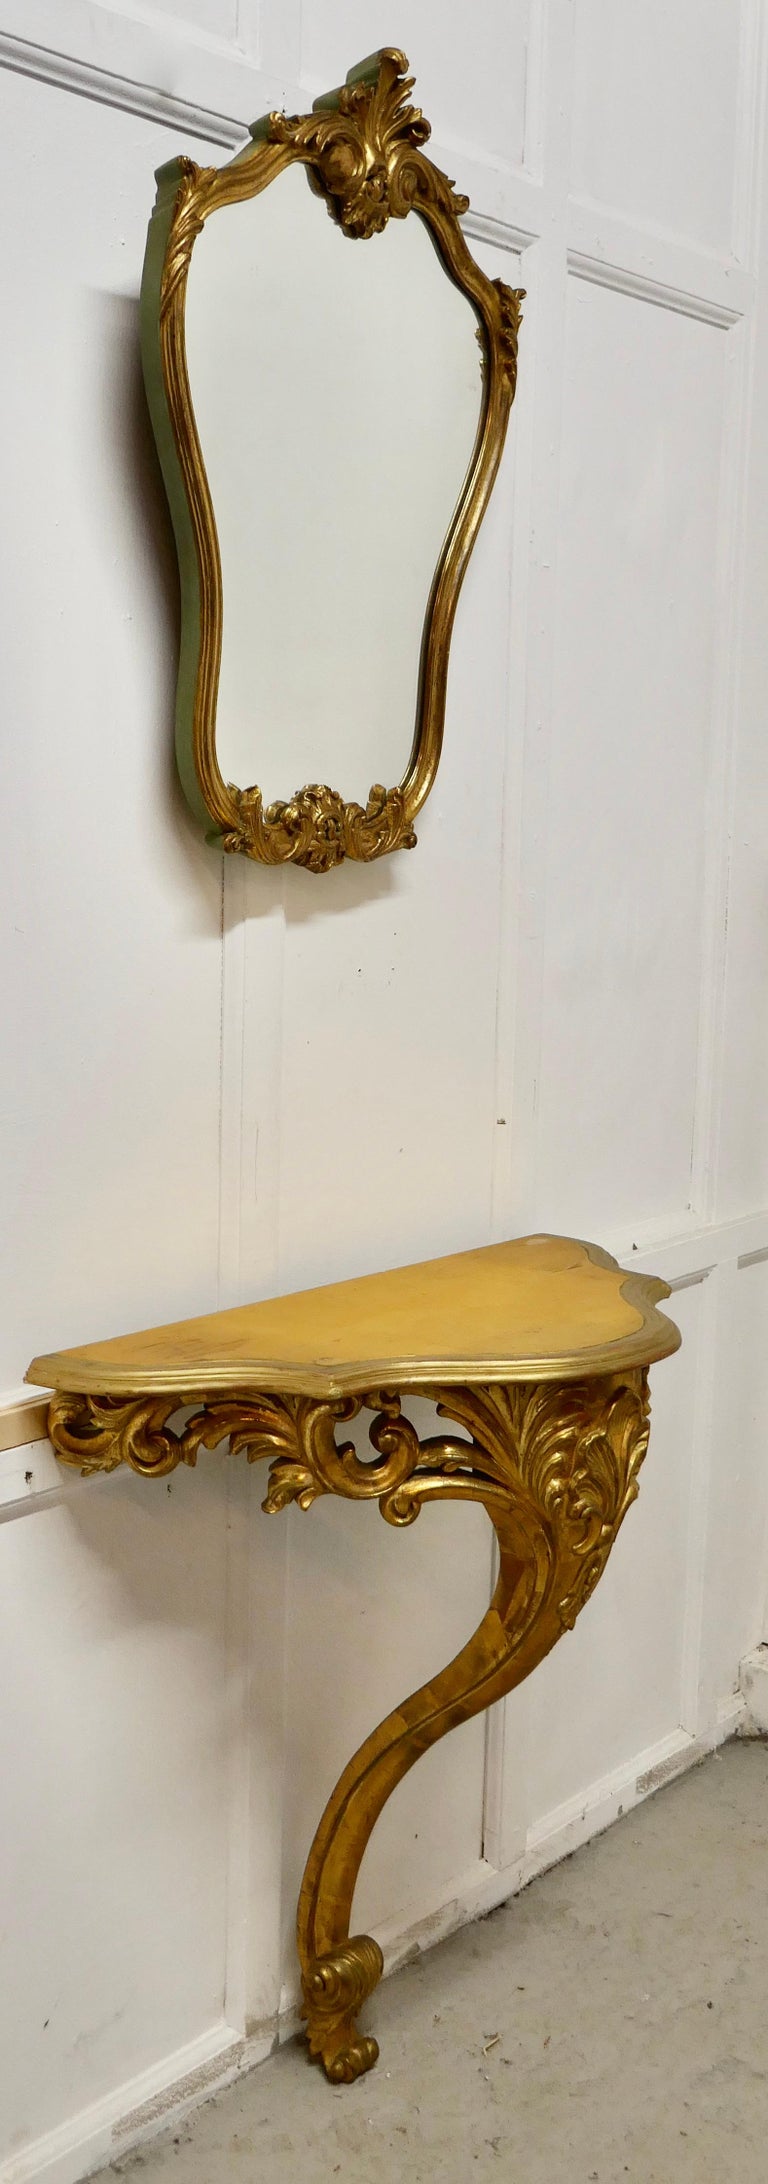 19th Century French Gilt Console or Hall Table and Matching Mirror Set For Sale 3